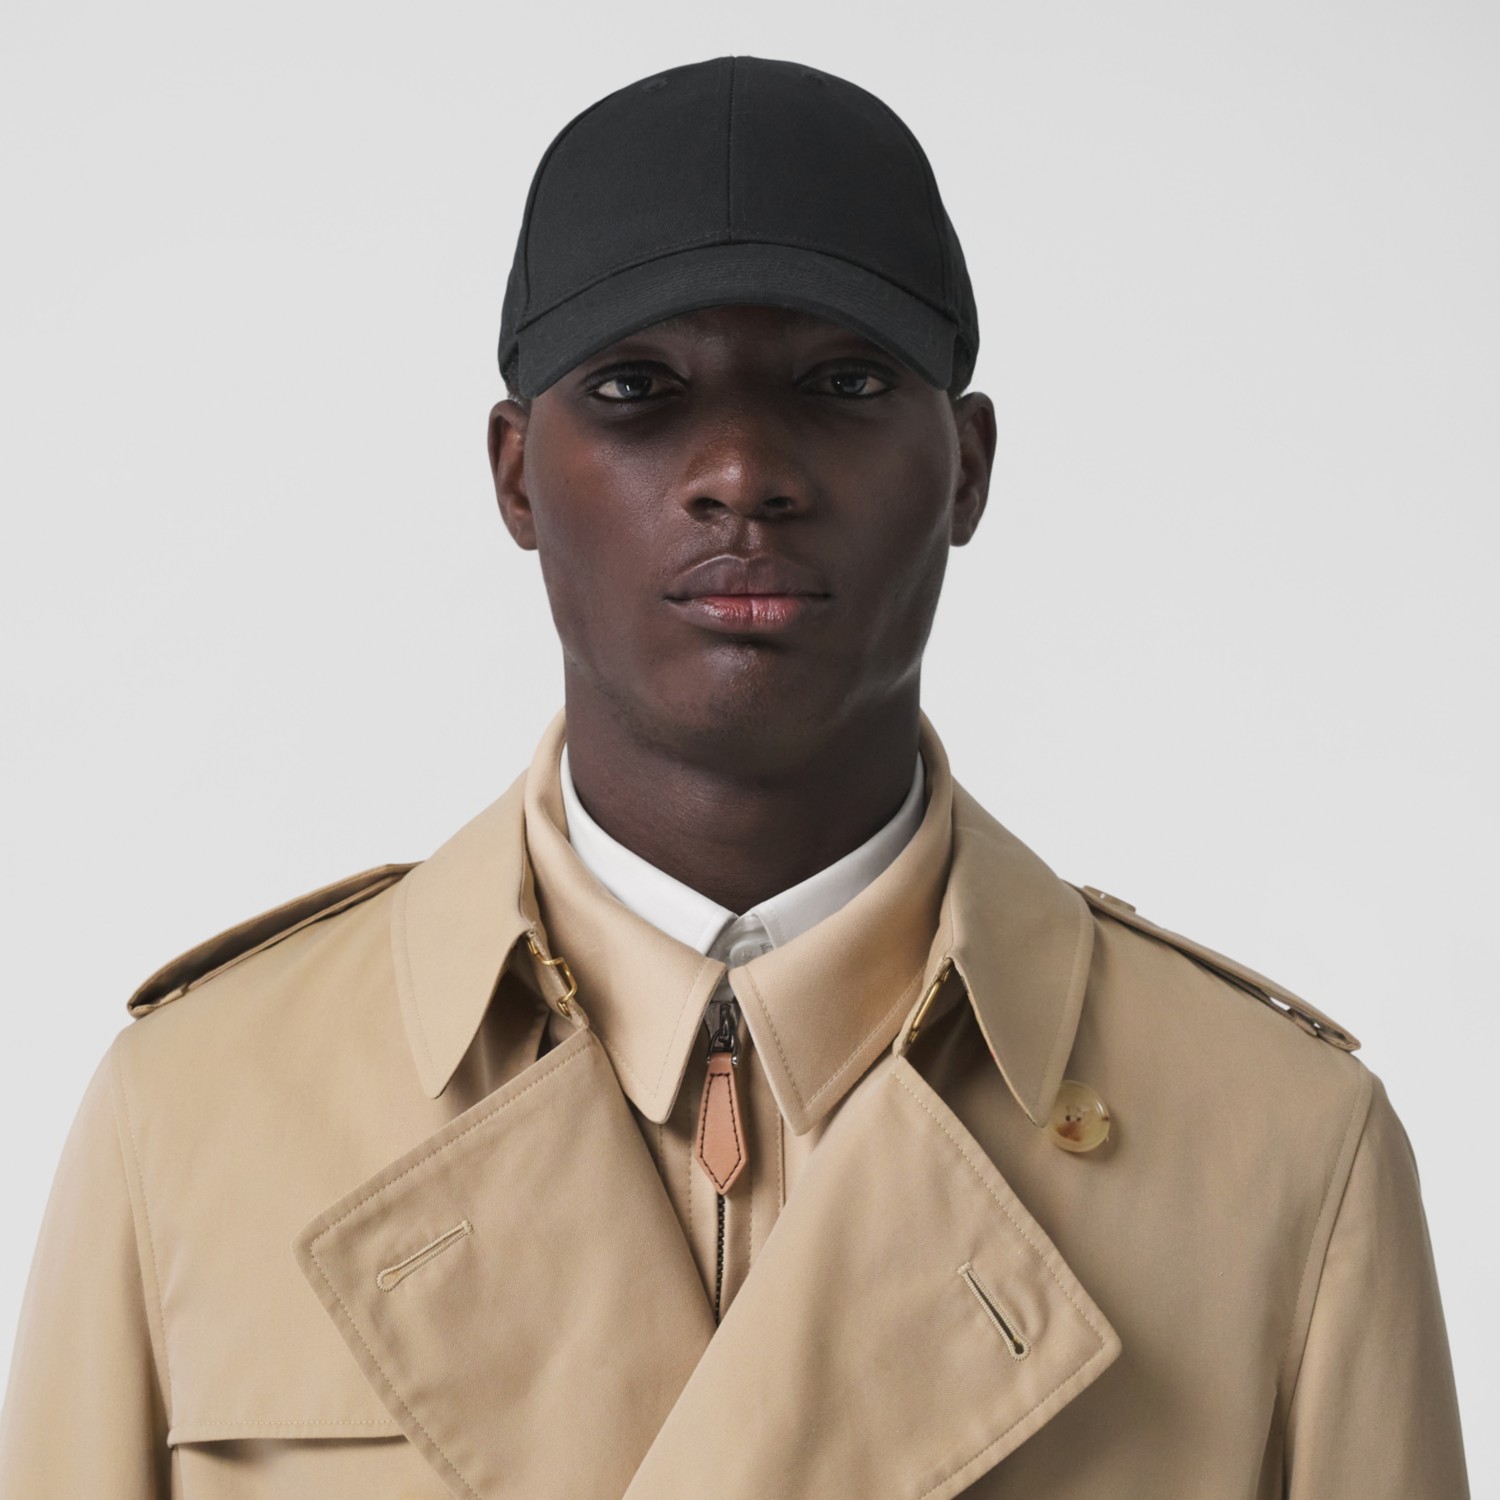 The Mid-length Chelsea Heritage Trench Coat